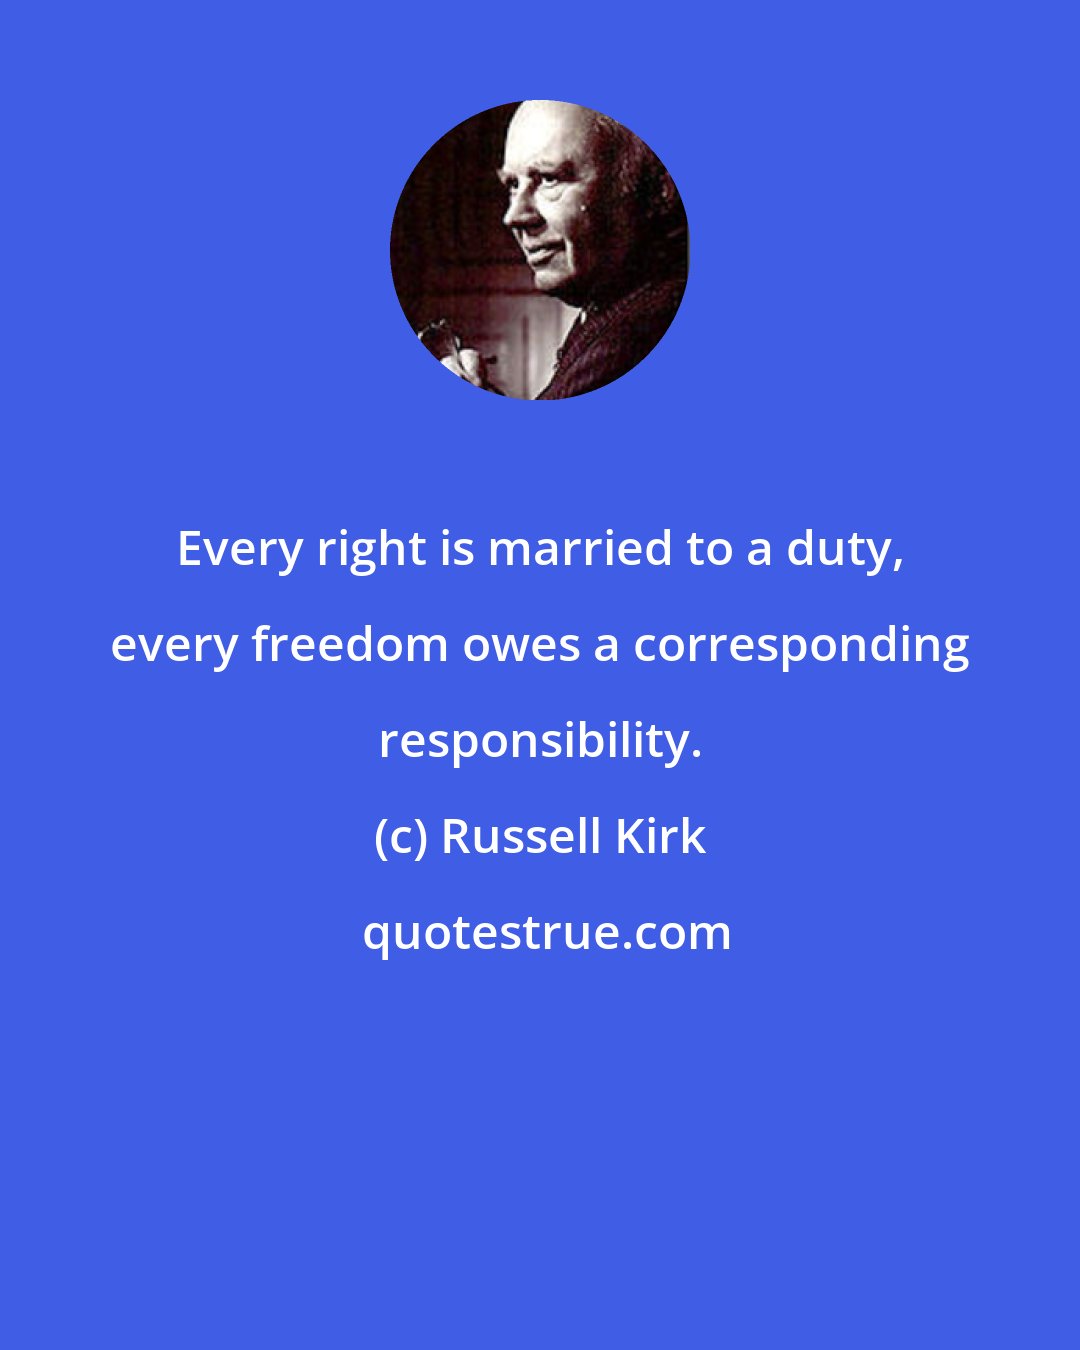 Russell Kirk: Every right is married to a duty, every freedom owes a corresponding responsibility.